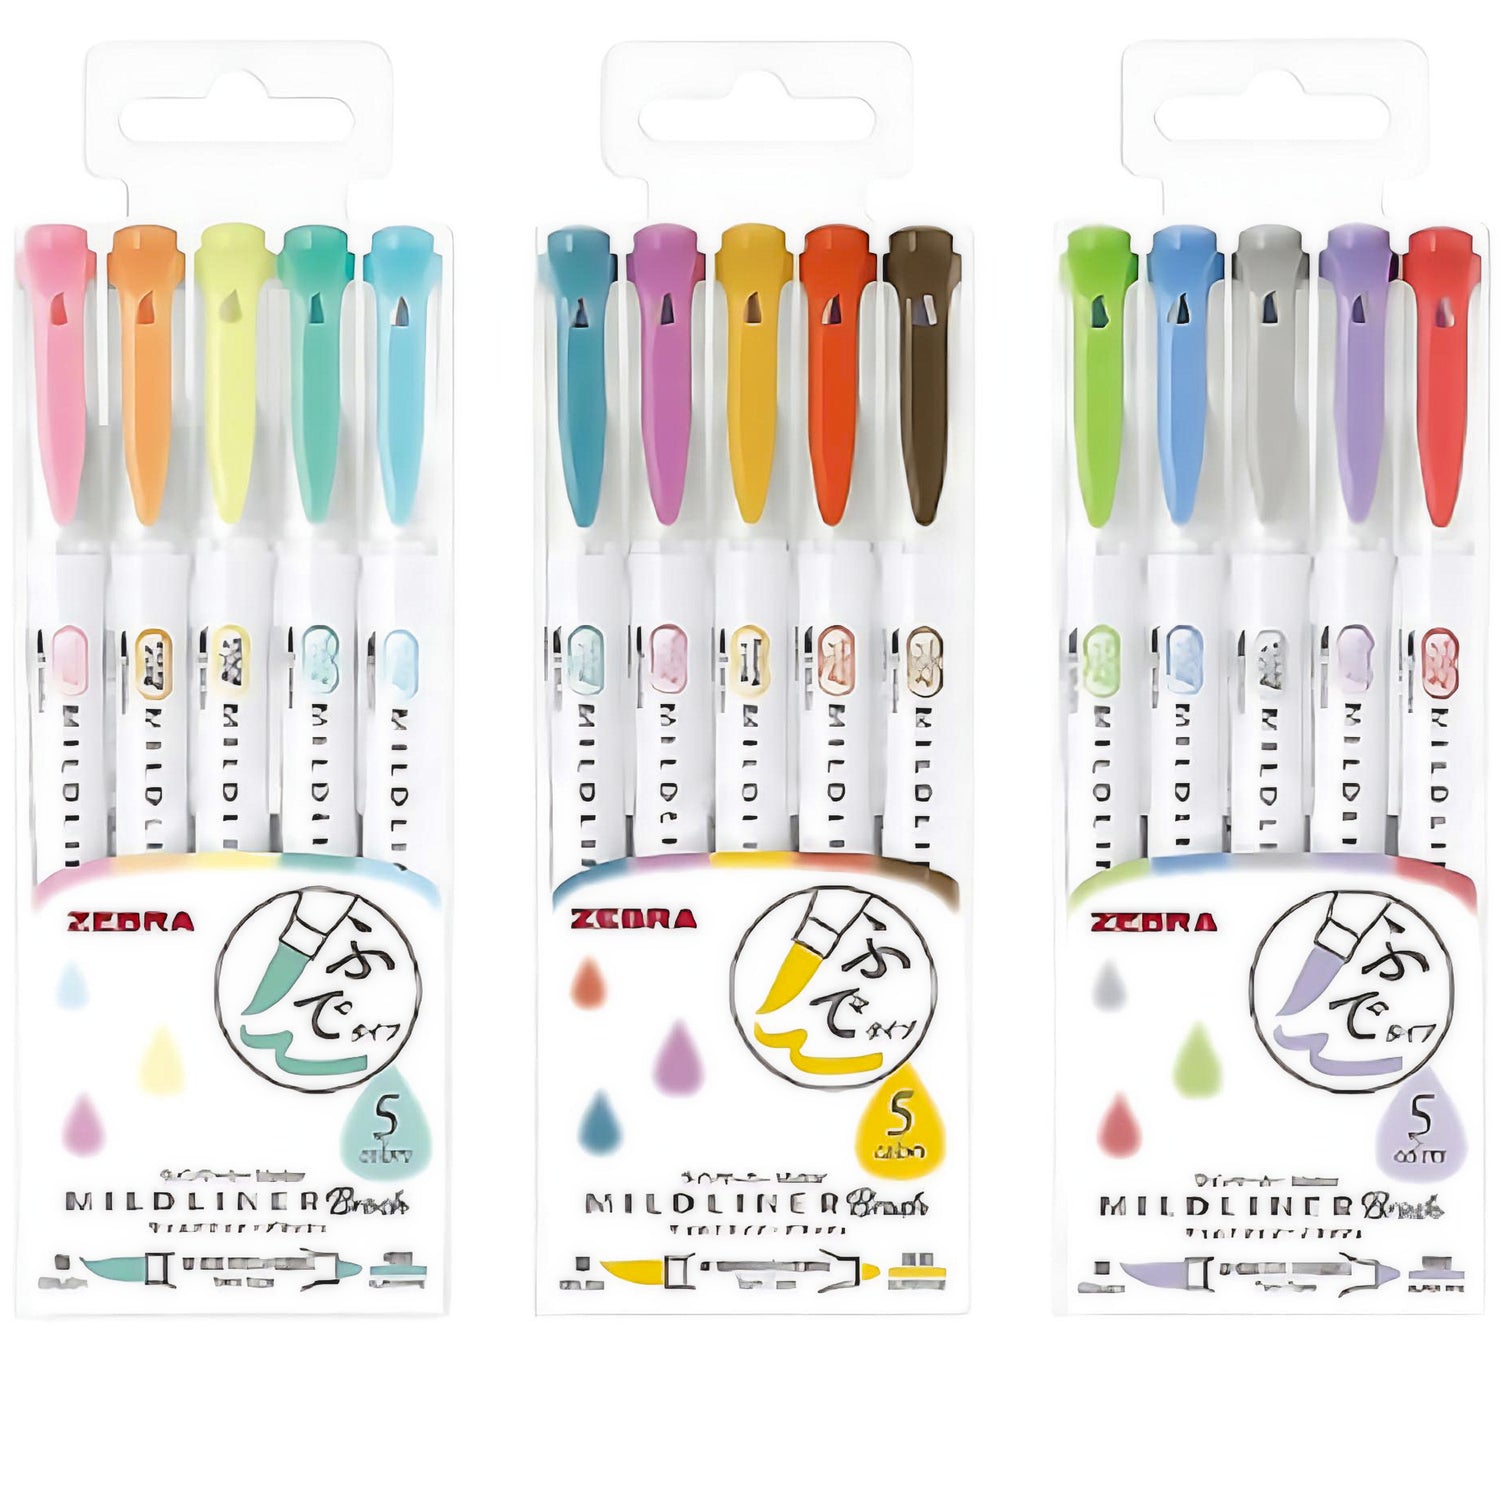 Art Brush Markers Pens for Adult Coloring Books, 34 Colors Numbered Dual  Tip (Br